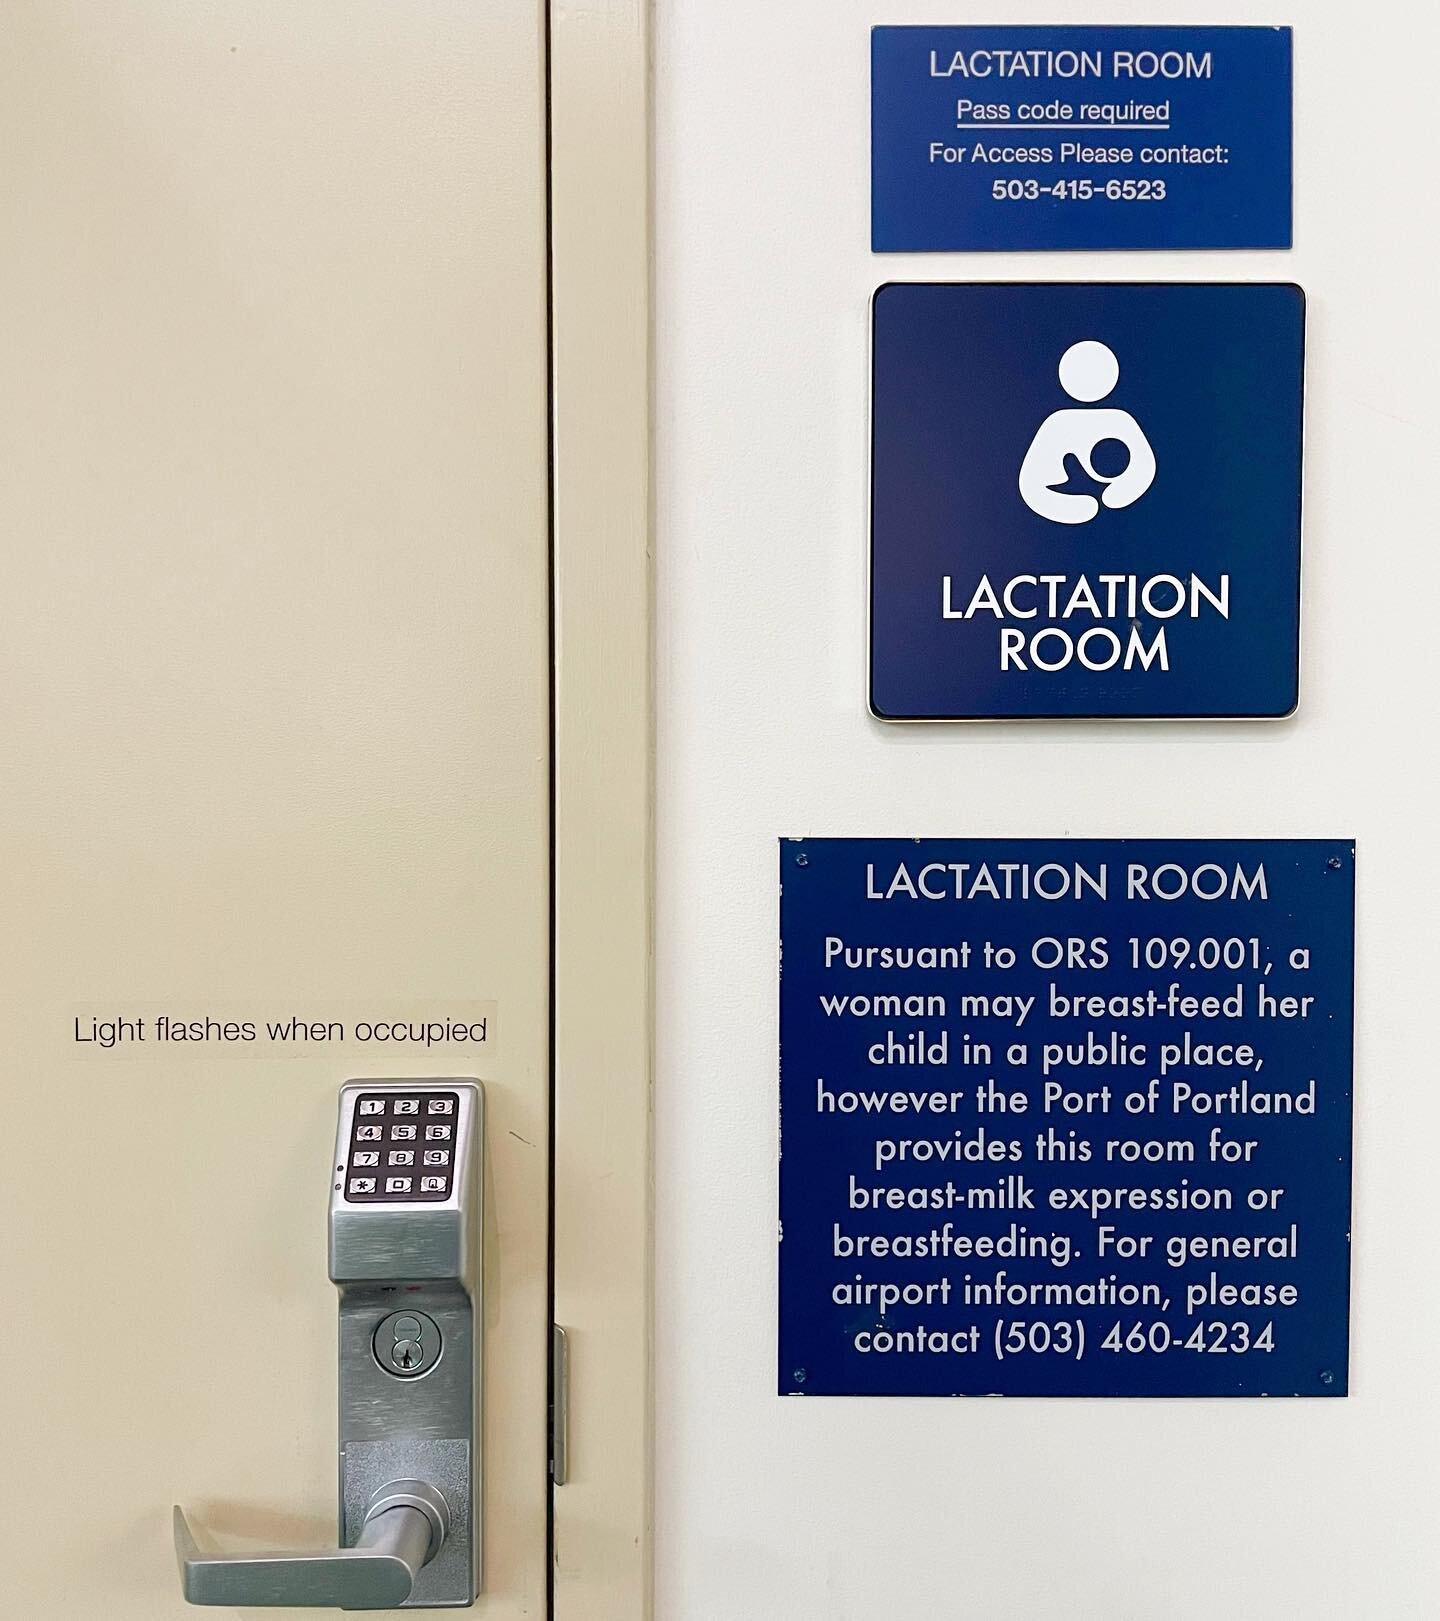 Whenever I travel I end up with pictures like this one&mdash;an airport lactation room. ✈️ I don&rsquo;t know how someone gets the code, but I like the idea of a quiet place for people who aren&rsquo;t as comfortable feeding their baby/toddler in pub